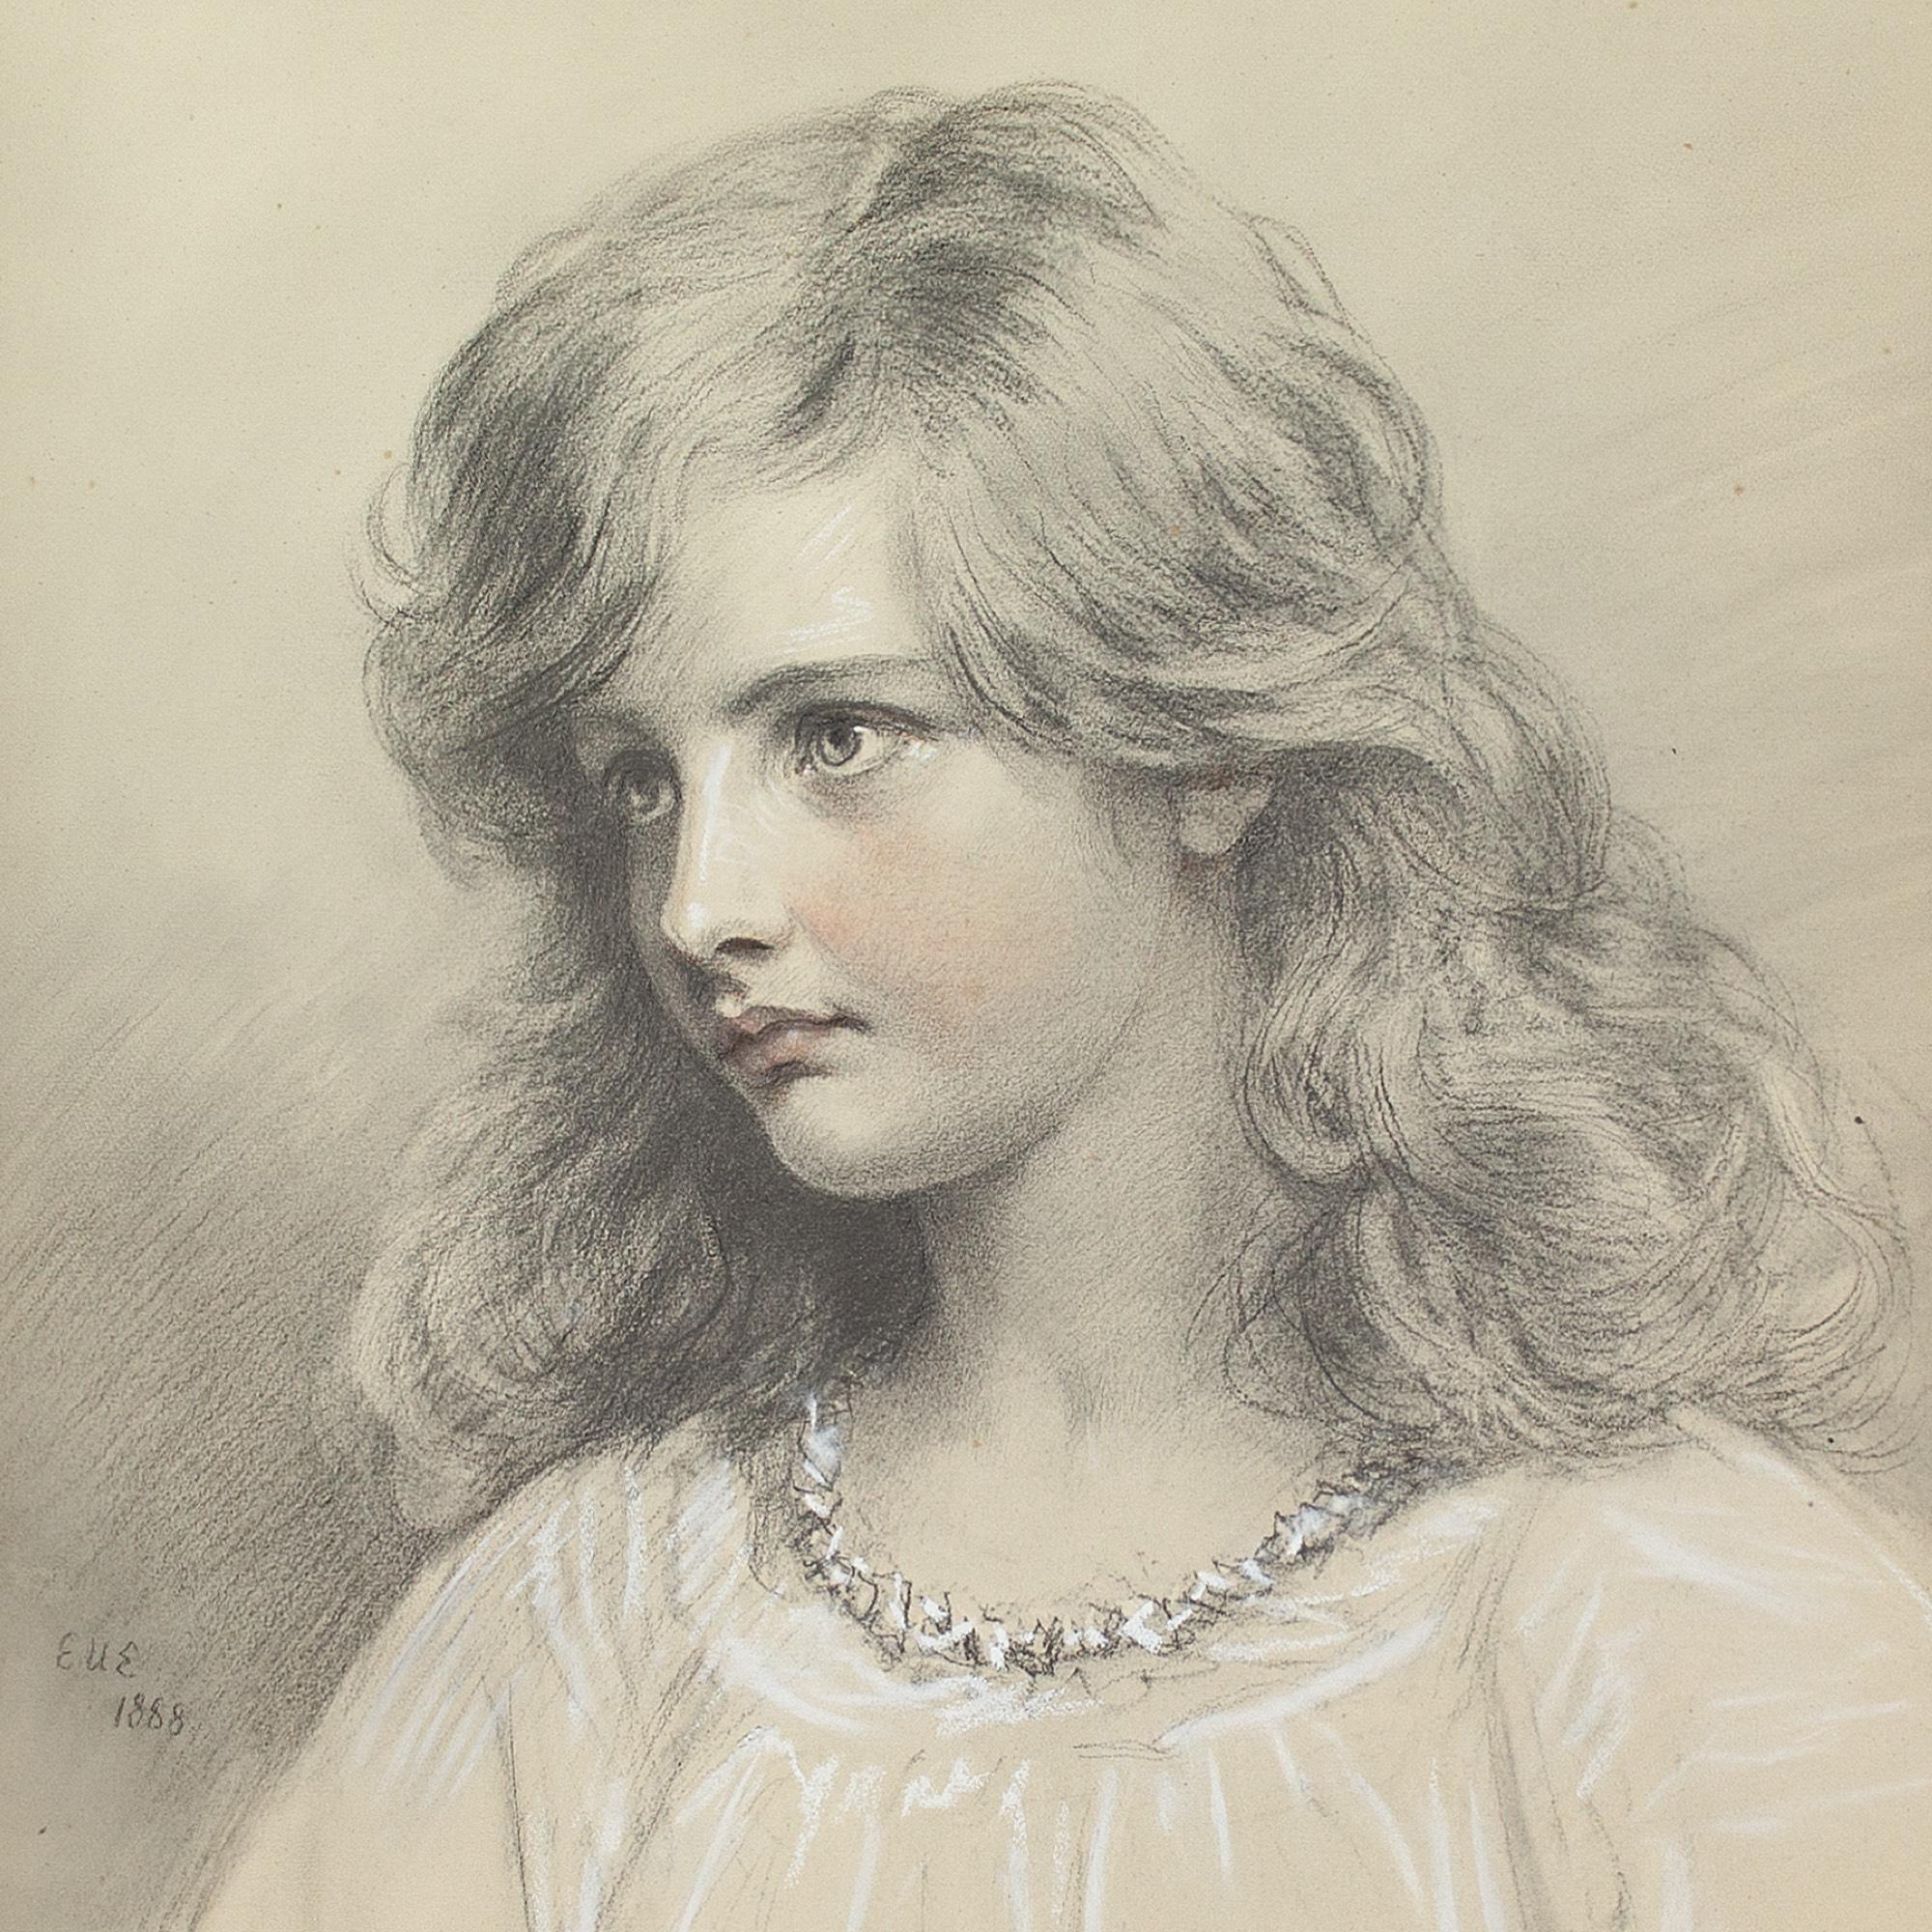 This charming late 19th-century portrait by British artist Eden Upton Eddis (1812-1901) depicts a young Muriel Paget Bowman (c.1876-1928), the daughter of Sir William Paget Bowman, a barrister, and Lady Emily Bowman (née Swabey).

Eden Upton Eddis